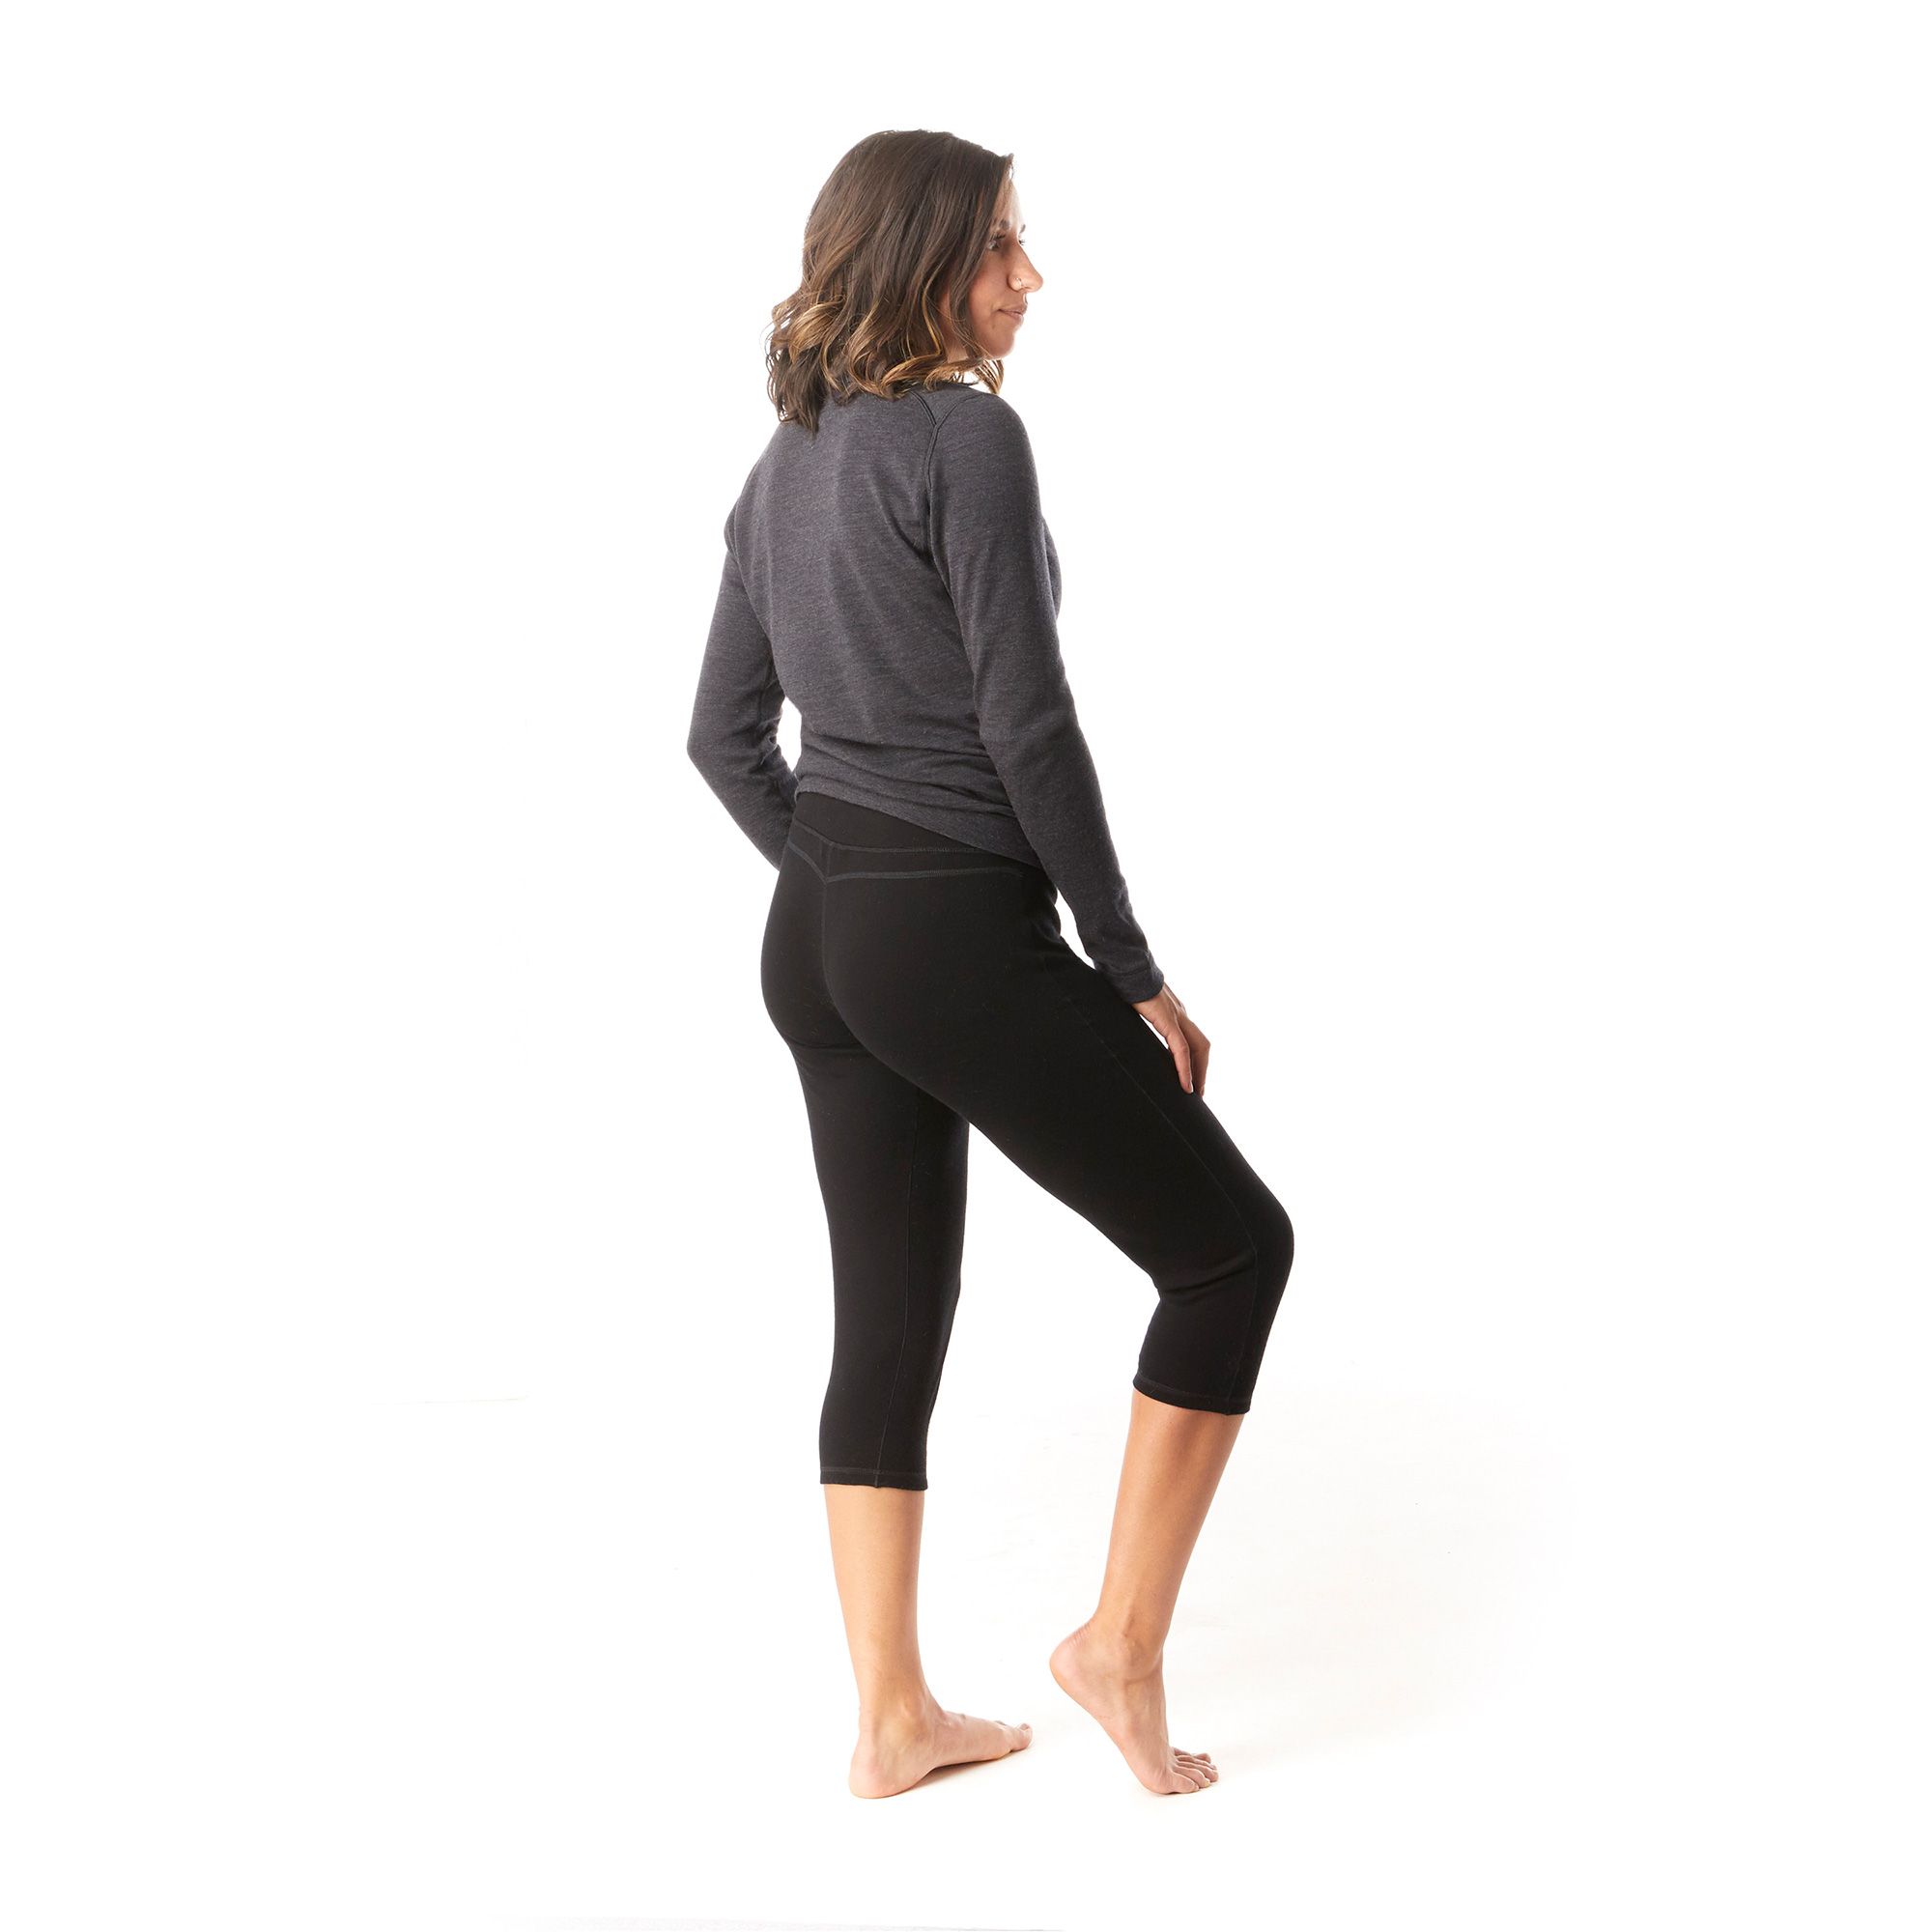  32 Degrees Womens Lightweight Baselayer Legging Form Fitting  4-Way Stretch Thermal